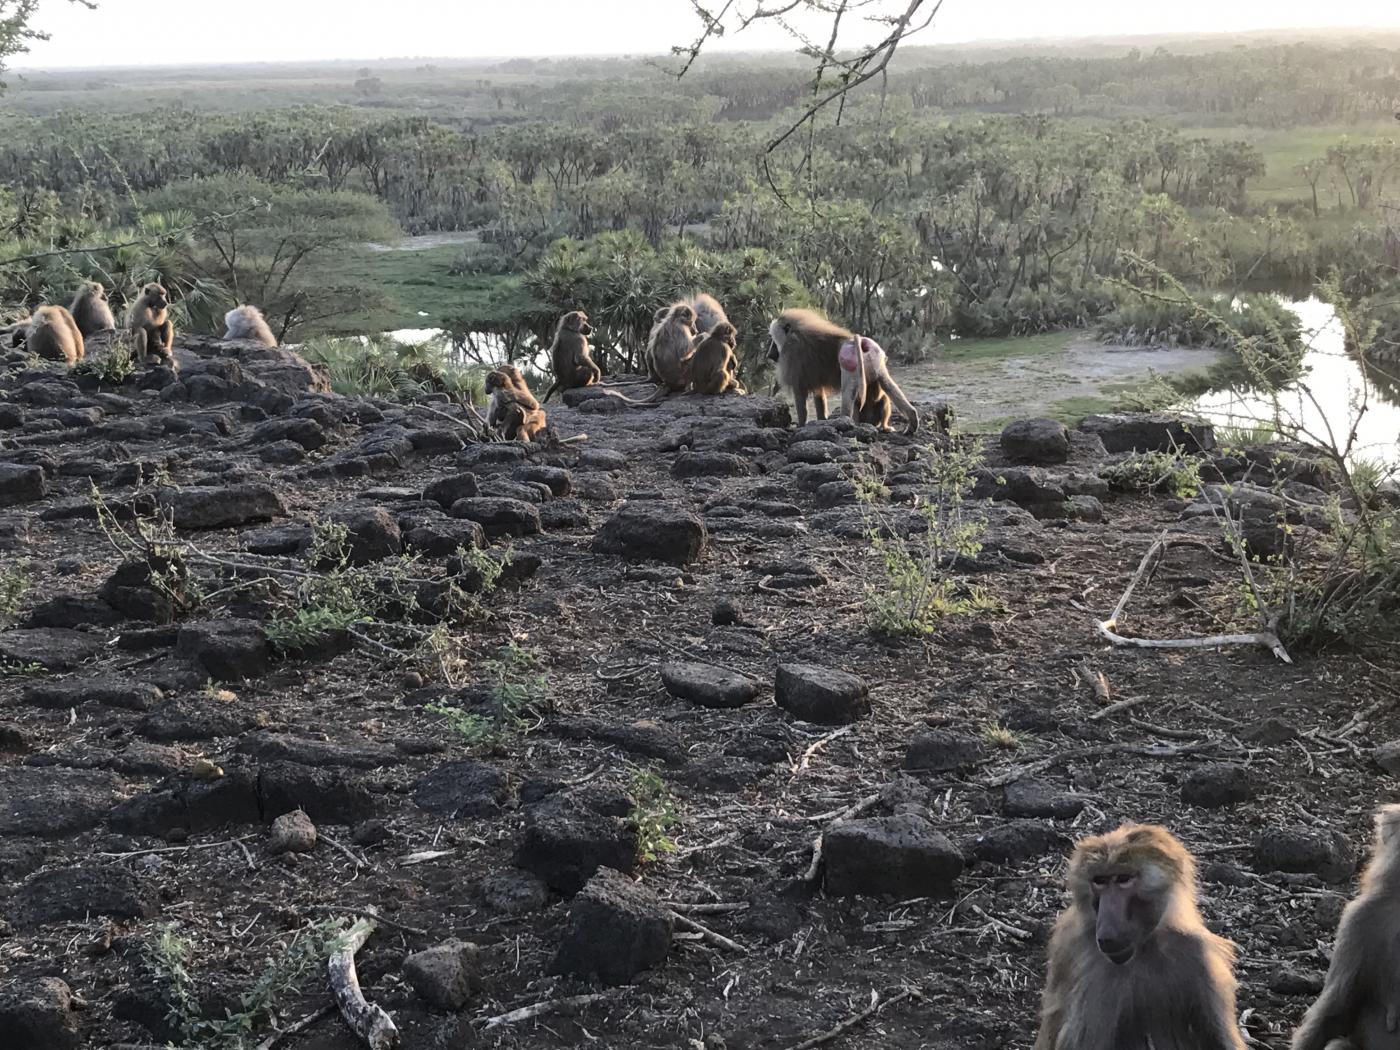 A troop of baboons in Ethiopia gathers on some rocks overlooking water and greenery